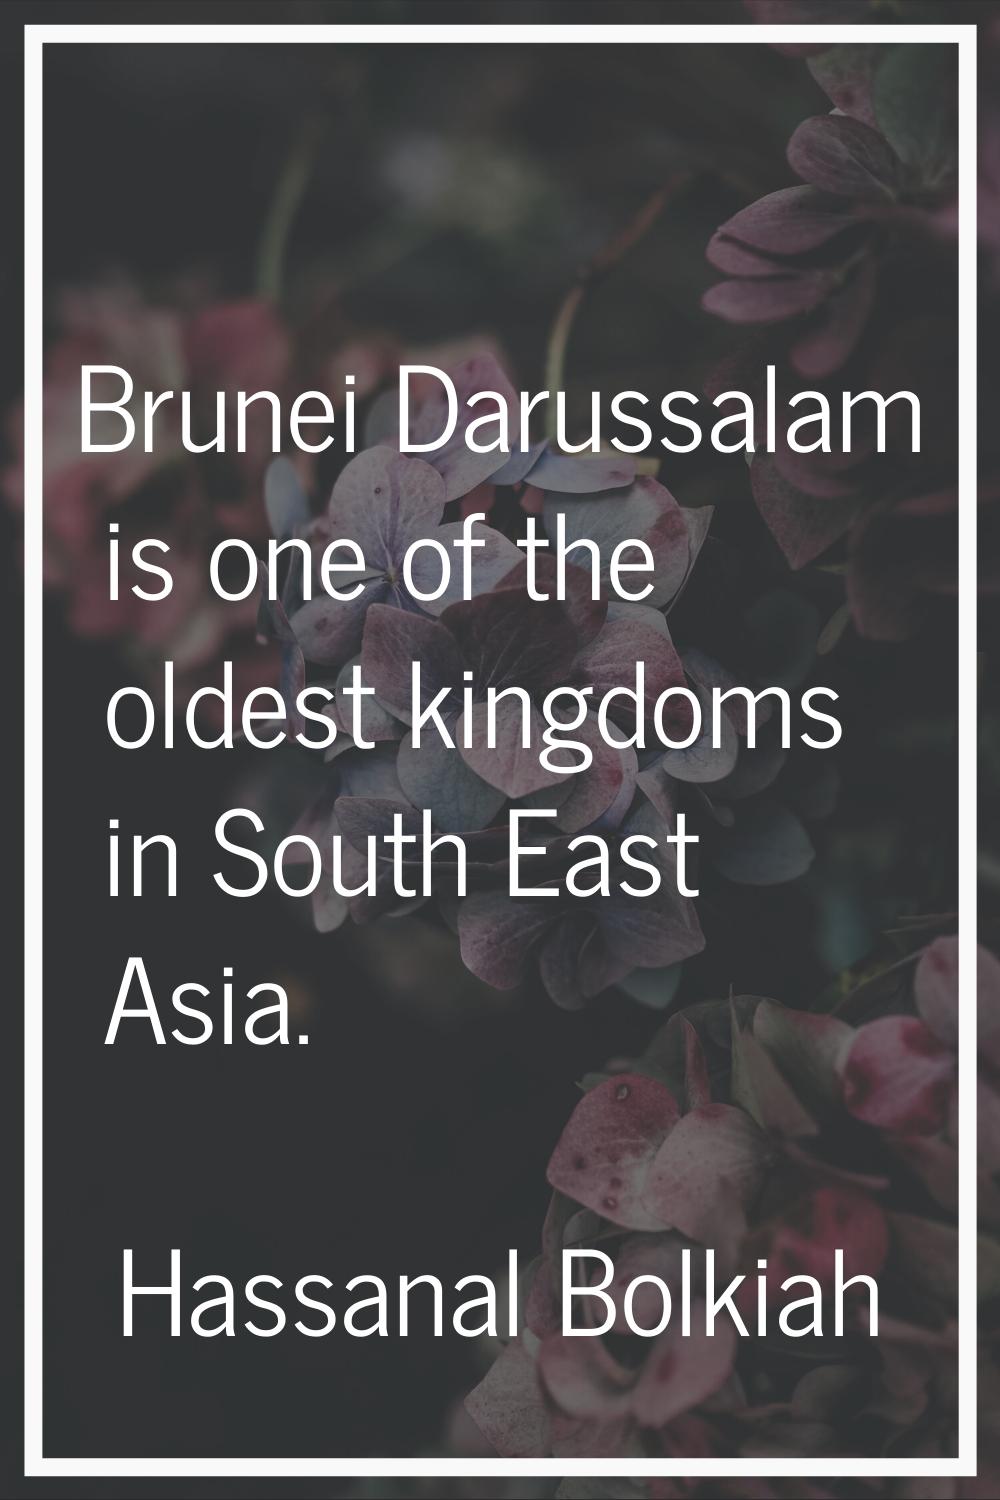 Brunei Darussalam is one of the oldest kingdoms in South East Asia.